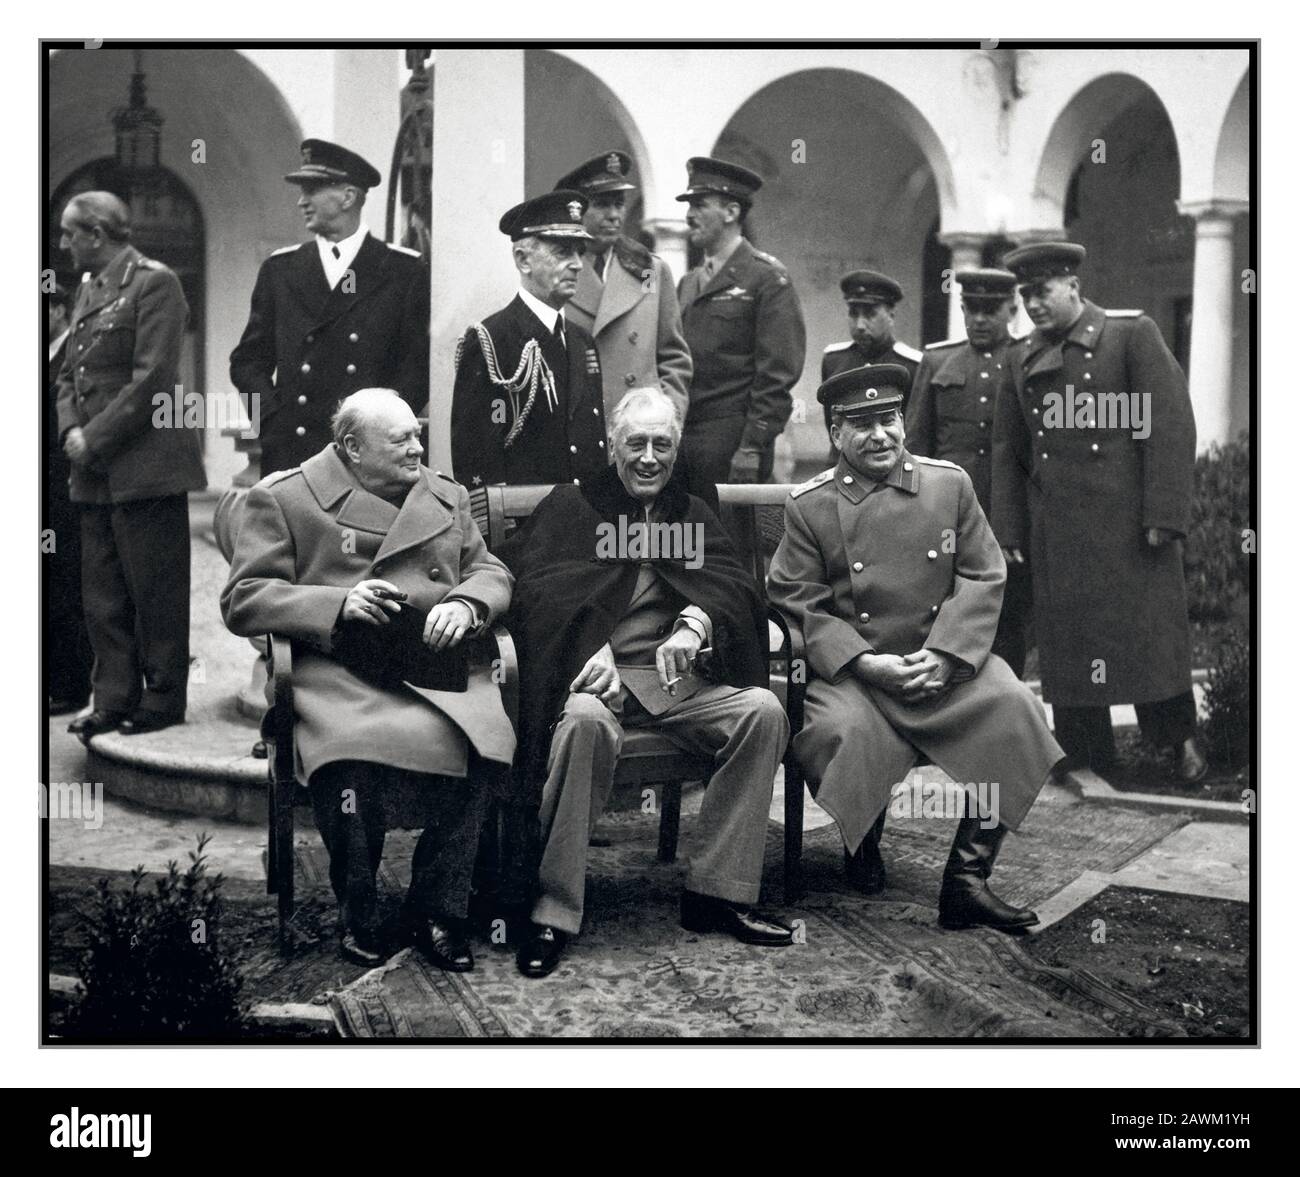 YALTA 1945 World War II Conference of the ‘Big Three’ at Yalta make final plans for the defeat of Germany.  Here the 'Big Three' happily sit on the patio together, Prime Minister Winston S. Churchill, President Franklin D. Roosevelt, and Premier Josef Stalin. February 1945. Stock Photo